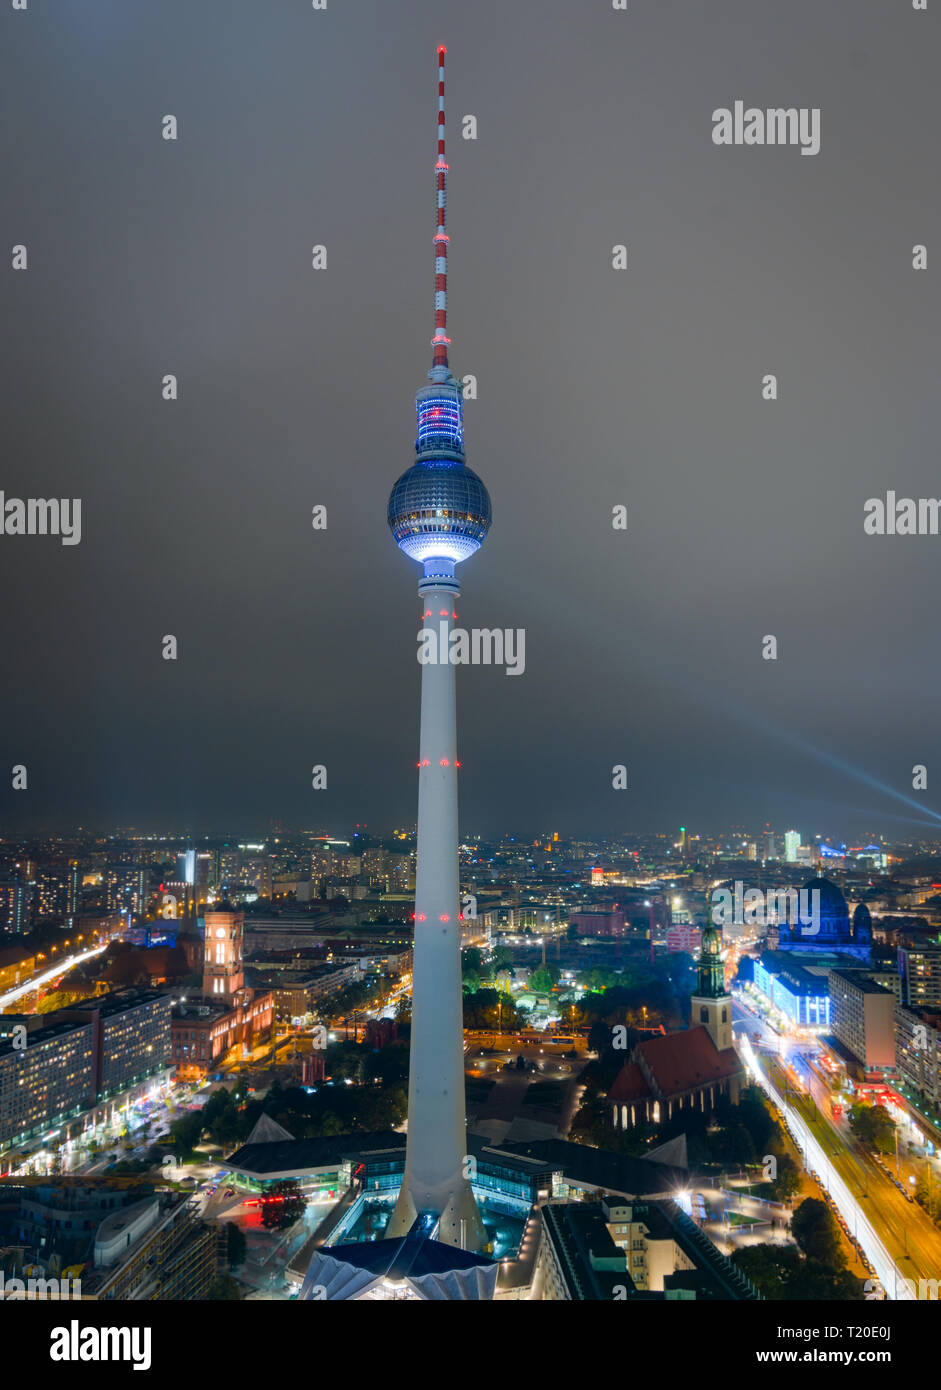 BERLIN, GERMANY - 5 Oct 2013: The Fernsehturm, a famous Berlin landmark is lit during the Light Fest 2013, at night in Berlin, Germany Stock Photo